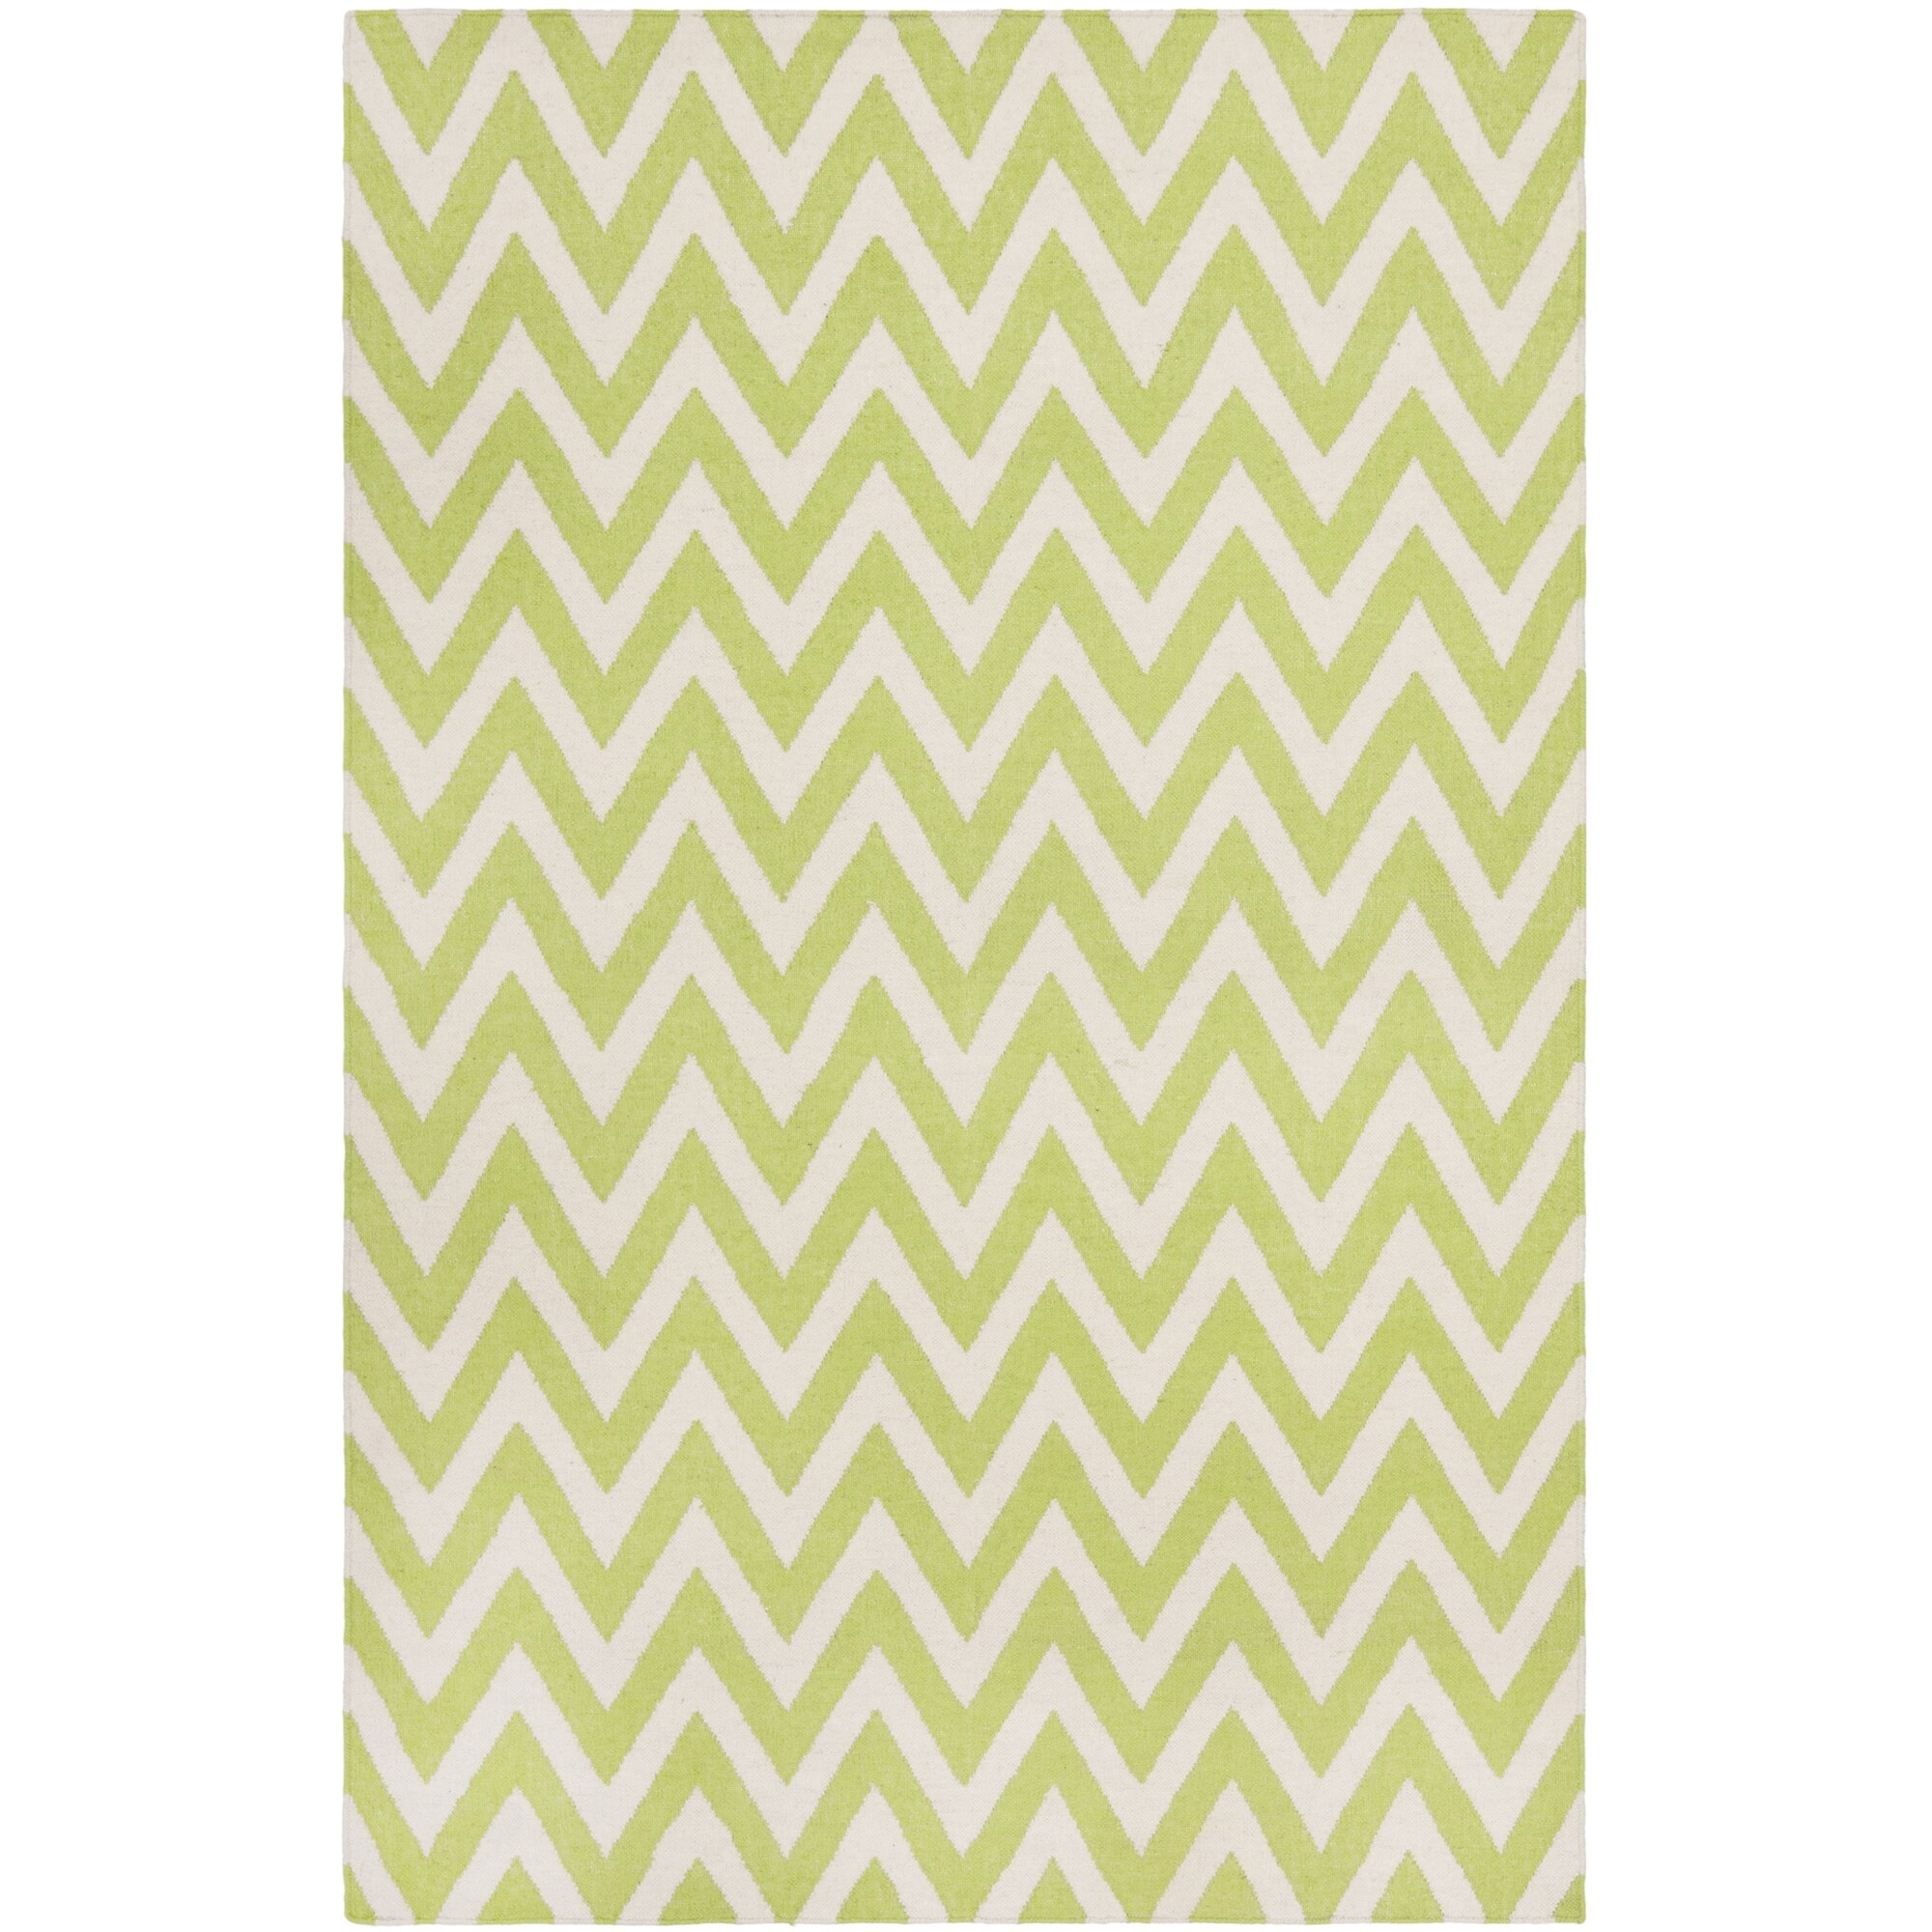 Hand woven Chevron Dhurrie Green Wool Rug Today $114.99 Sale $103.49